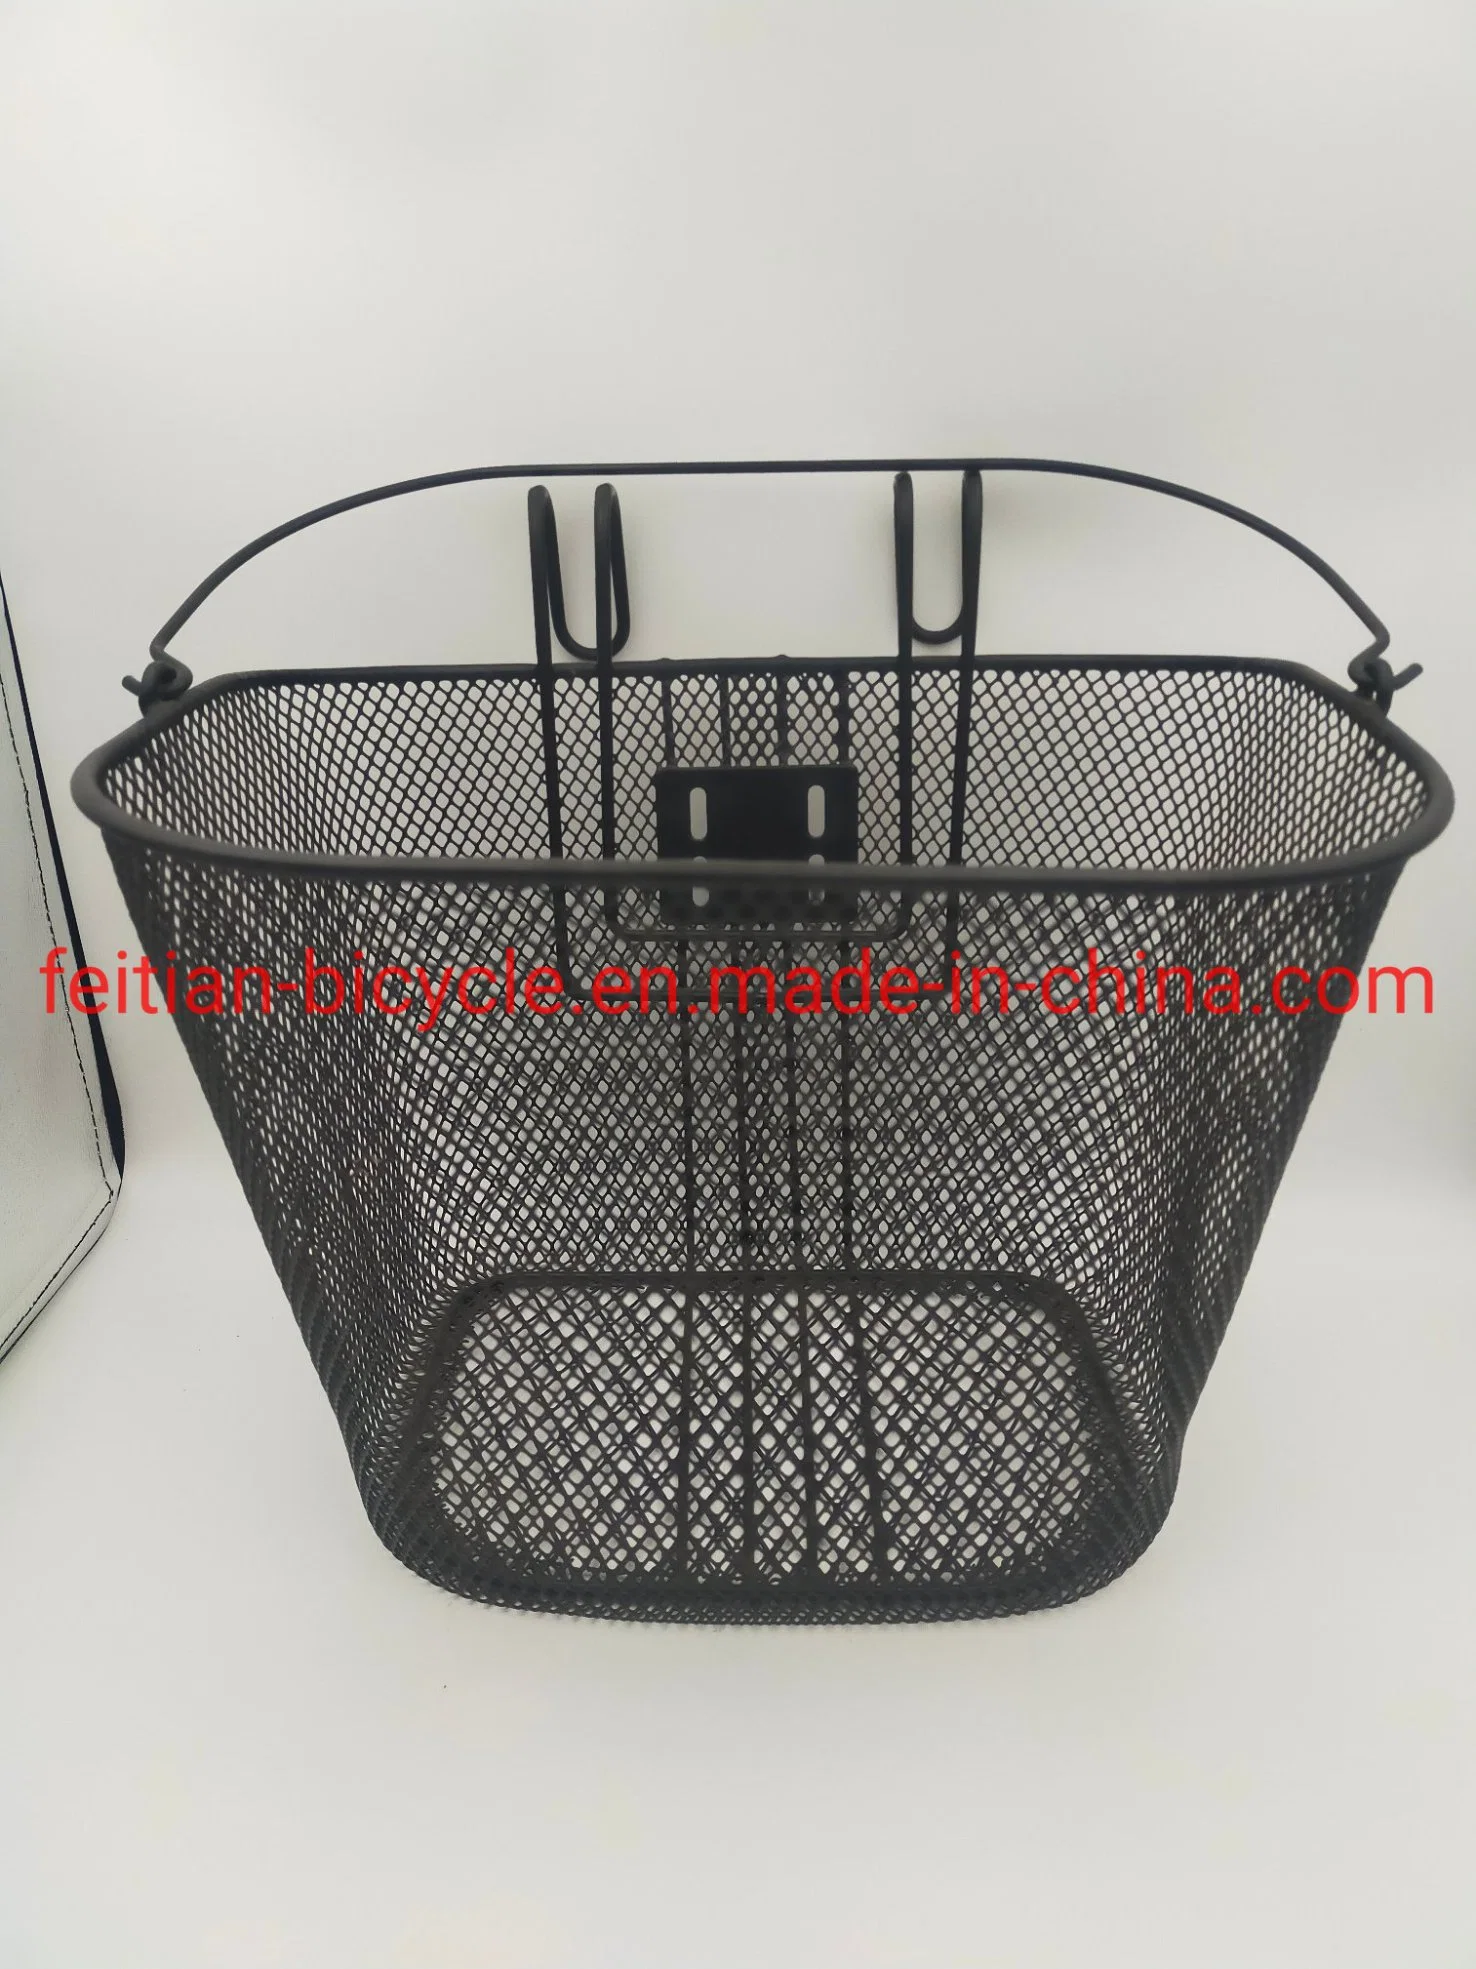 Adult Bicycle Basket Steel Wire Front Basket for Sale